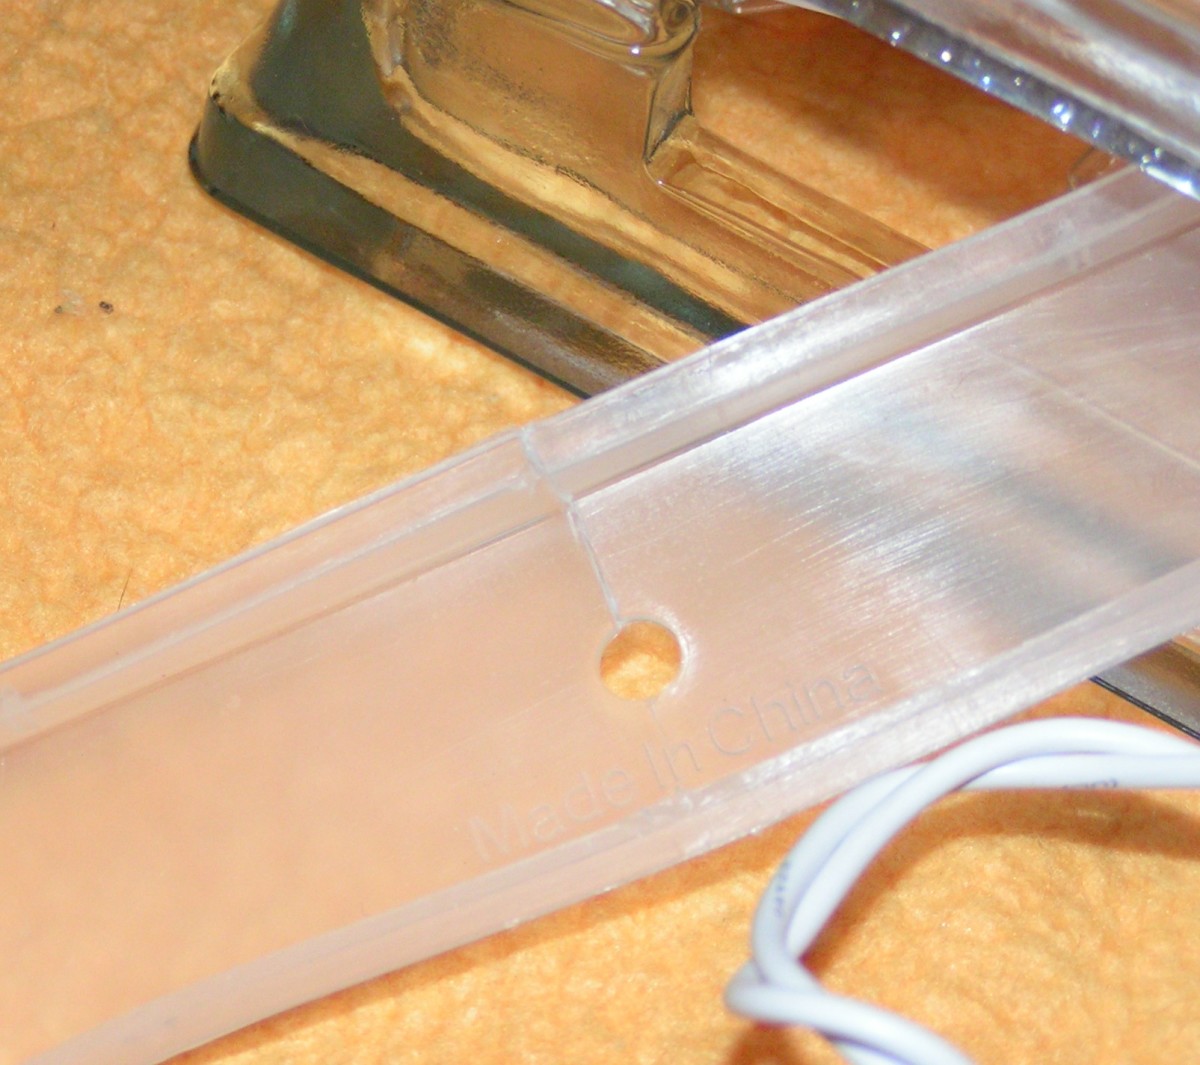 Step 3: Cut a slit in the plastic 